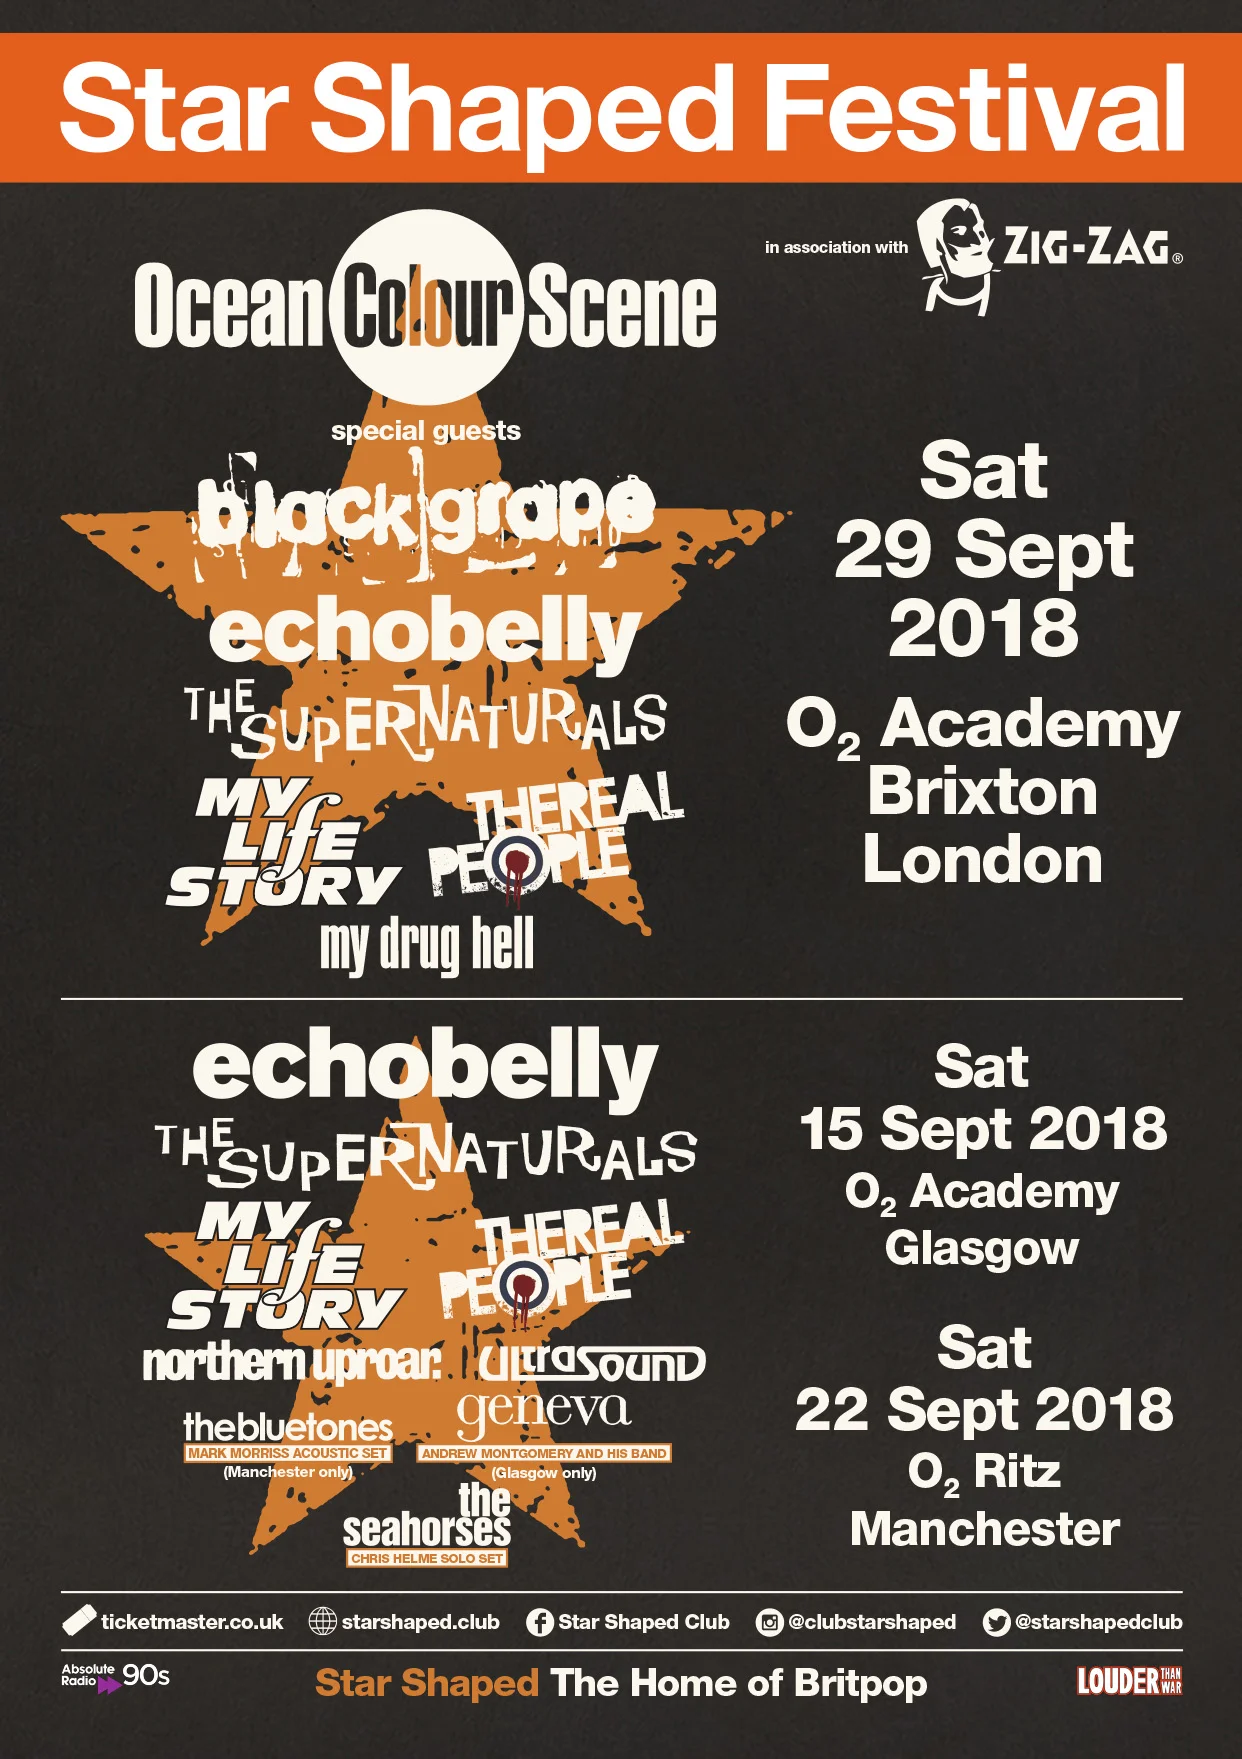 Star Shaped Festival 2018 - The one-day Britpop festival!